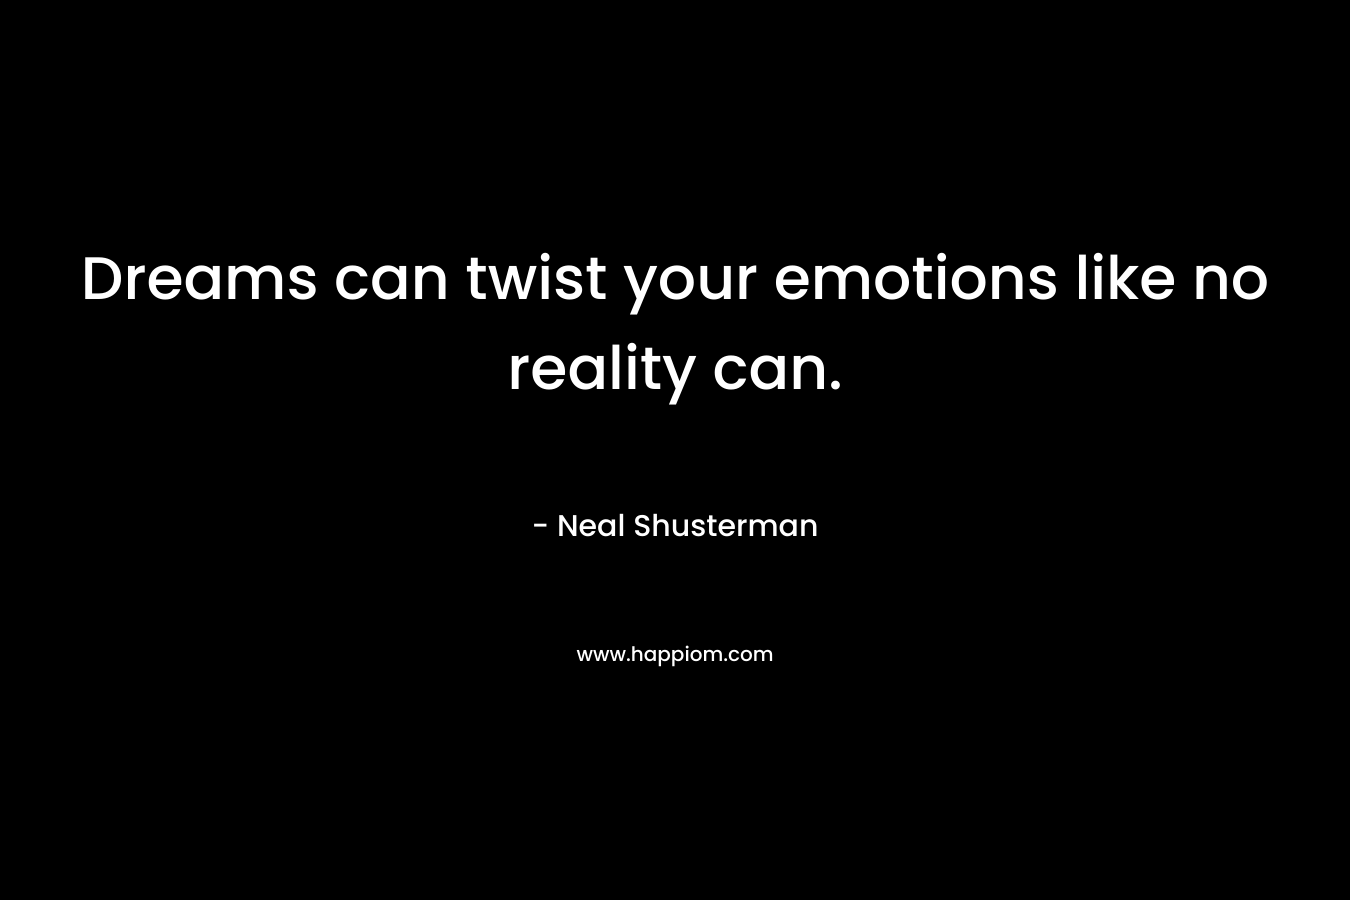 Dreams can twist your emotions like no reality can.